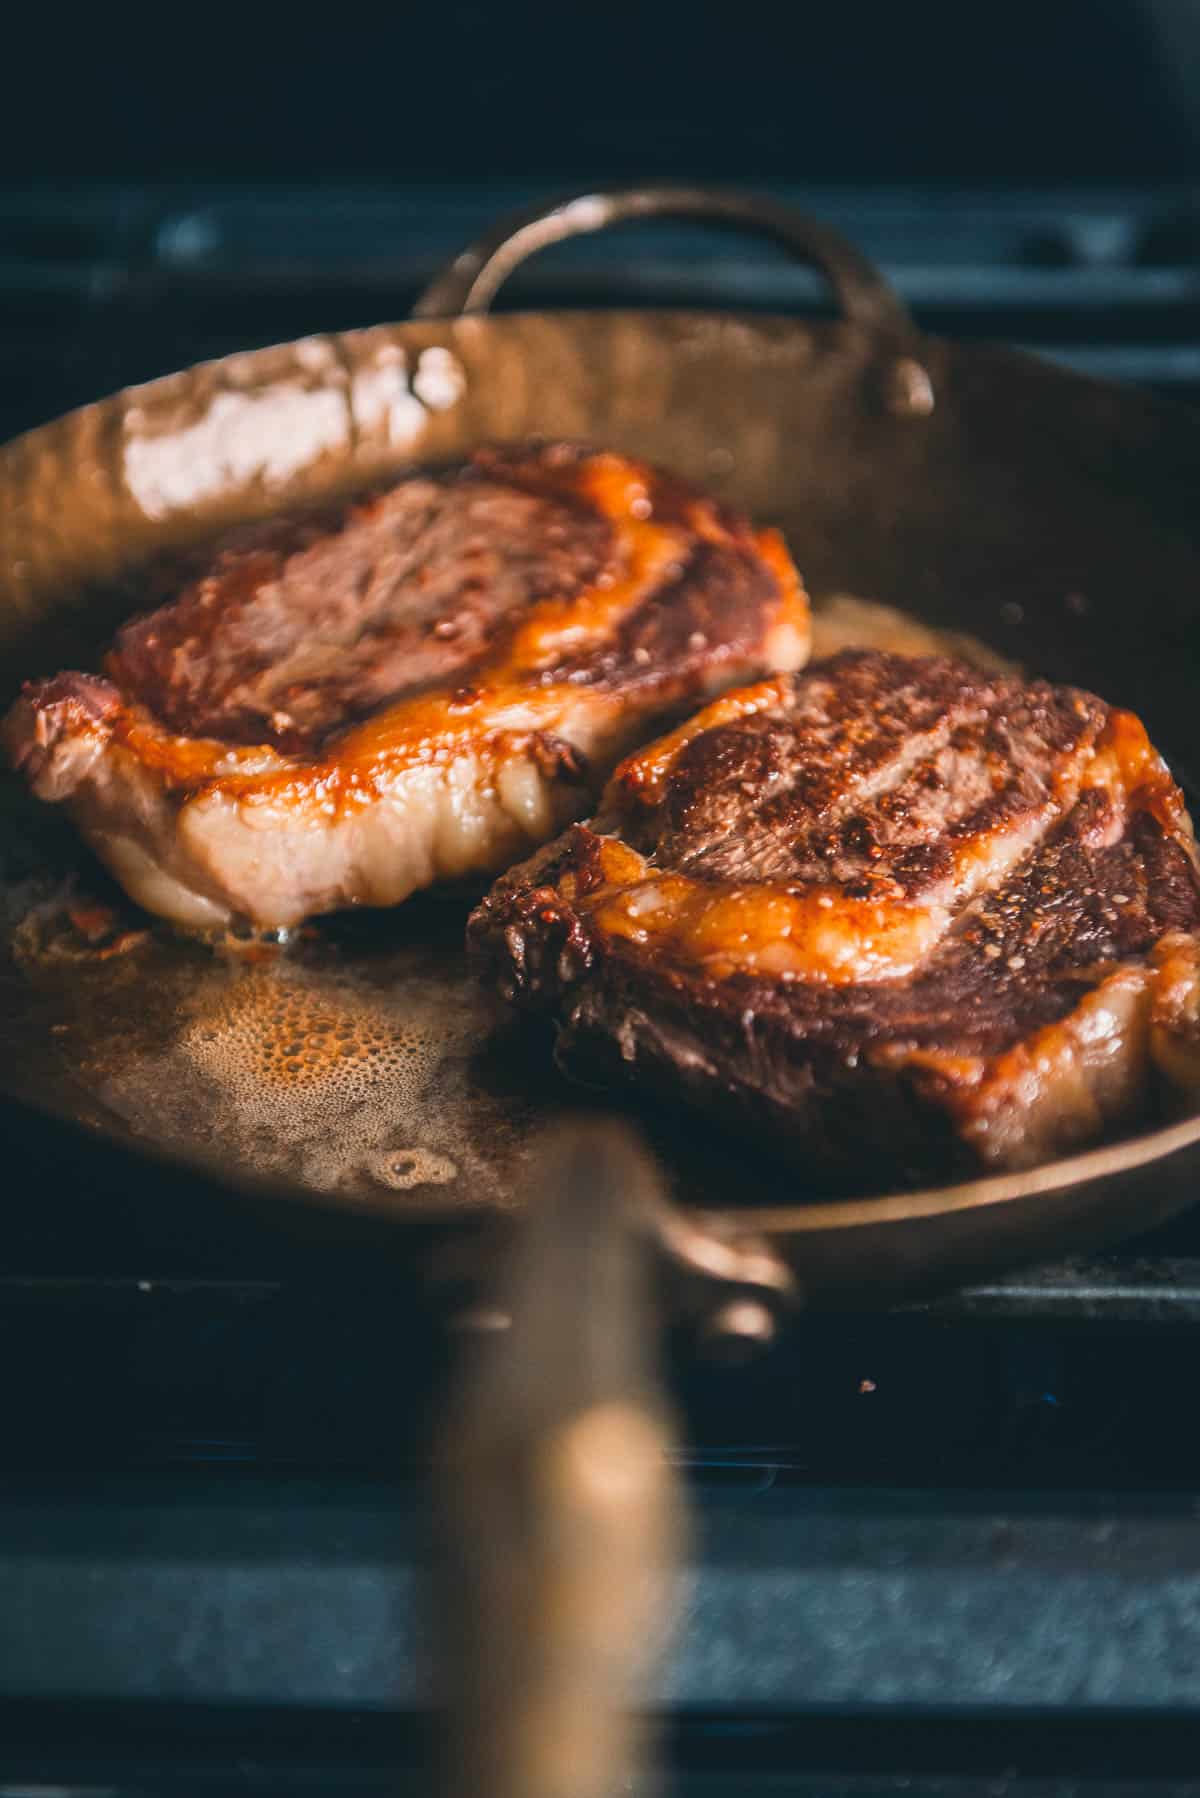 Two ribeyes cooking in a skillet on a stove, with juices bubbling around the edges of the meat.